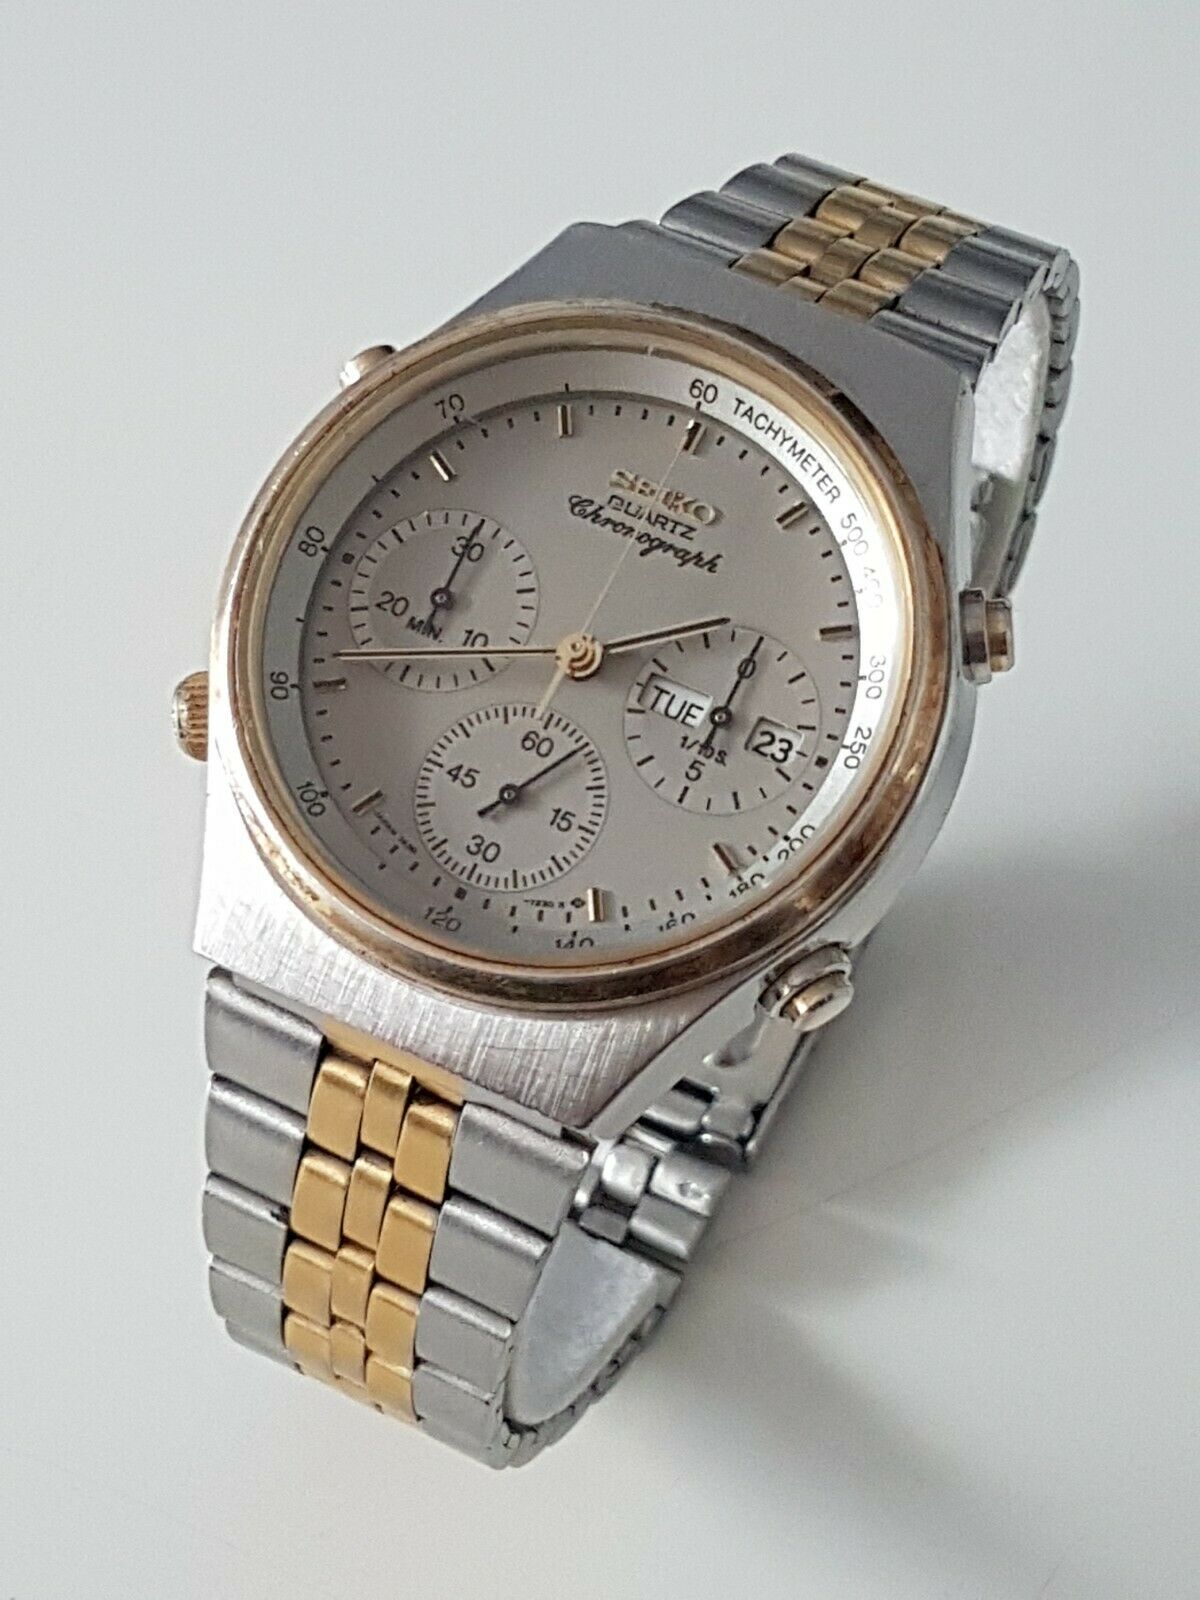 7A38-727A-Stainless+Gold-GreyFace-eBay(Germany)-Feb2021-(Re-seller)-1.jpg